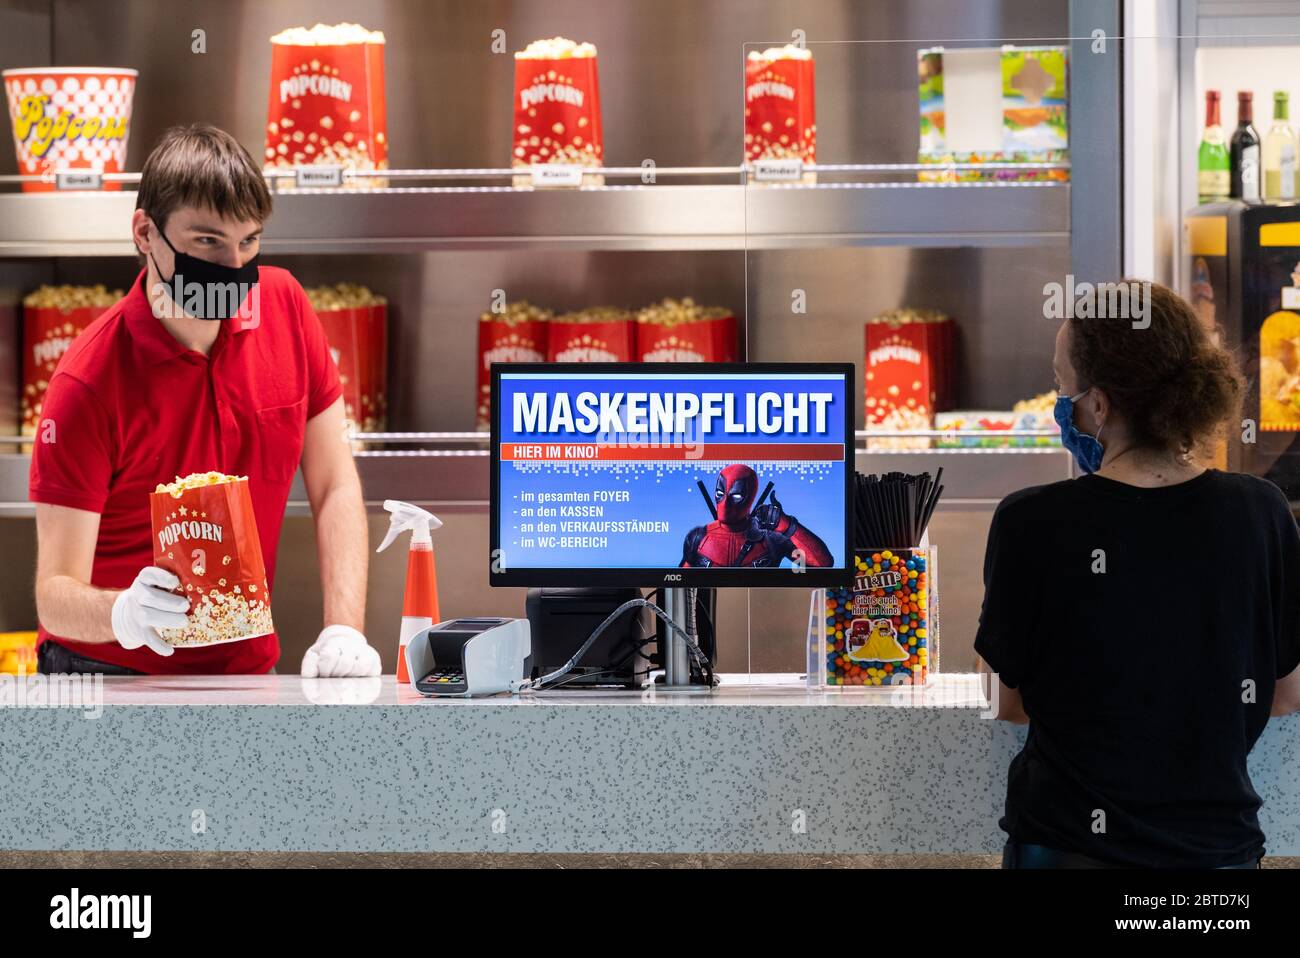 Dresden, Germany. 22nd May, 2020. On a screen in the foyer of the Ufa-Kristallpalast cinema in the inner city, the obligation to wear masks is pointed out, while an employee sells popcorn at the counter. As the first big cinema in the city, the Ufa-Palast was allowed to reopen after the Corona lockdown. (to dpa 'With popcorn, without mask: How can a visit to the cinema look like now?') Credit: Robert Michael/dpa-Zentralbild/dpa/Alamy Live News Stock Photo